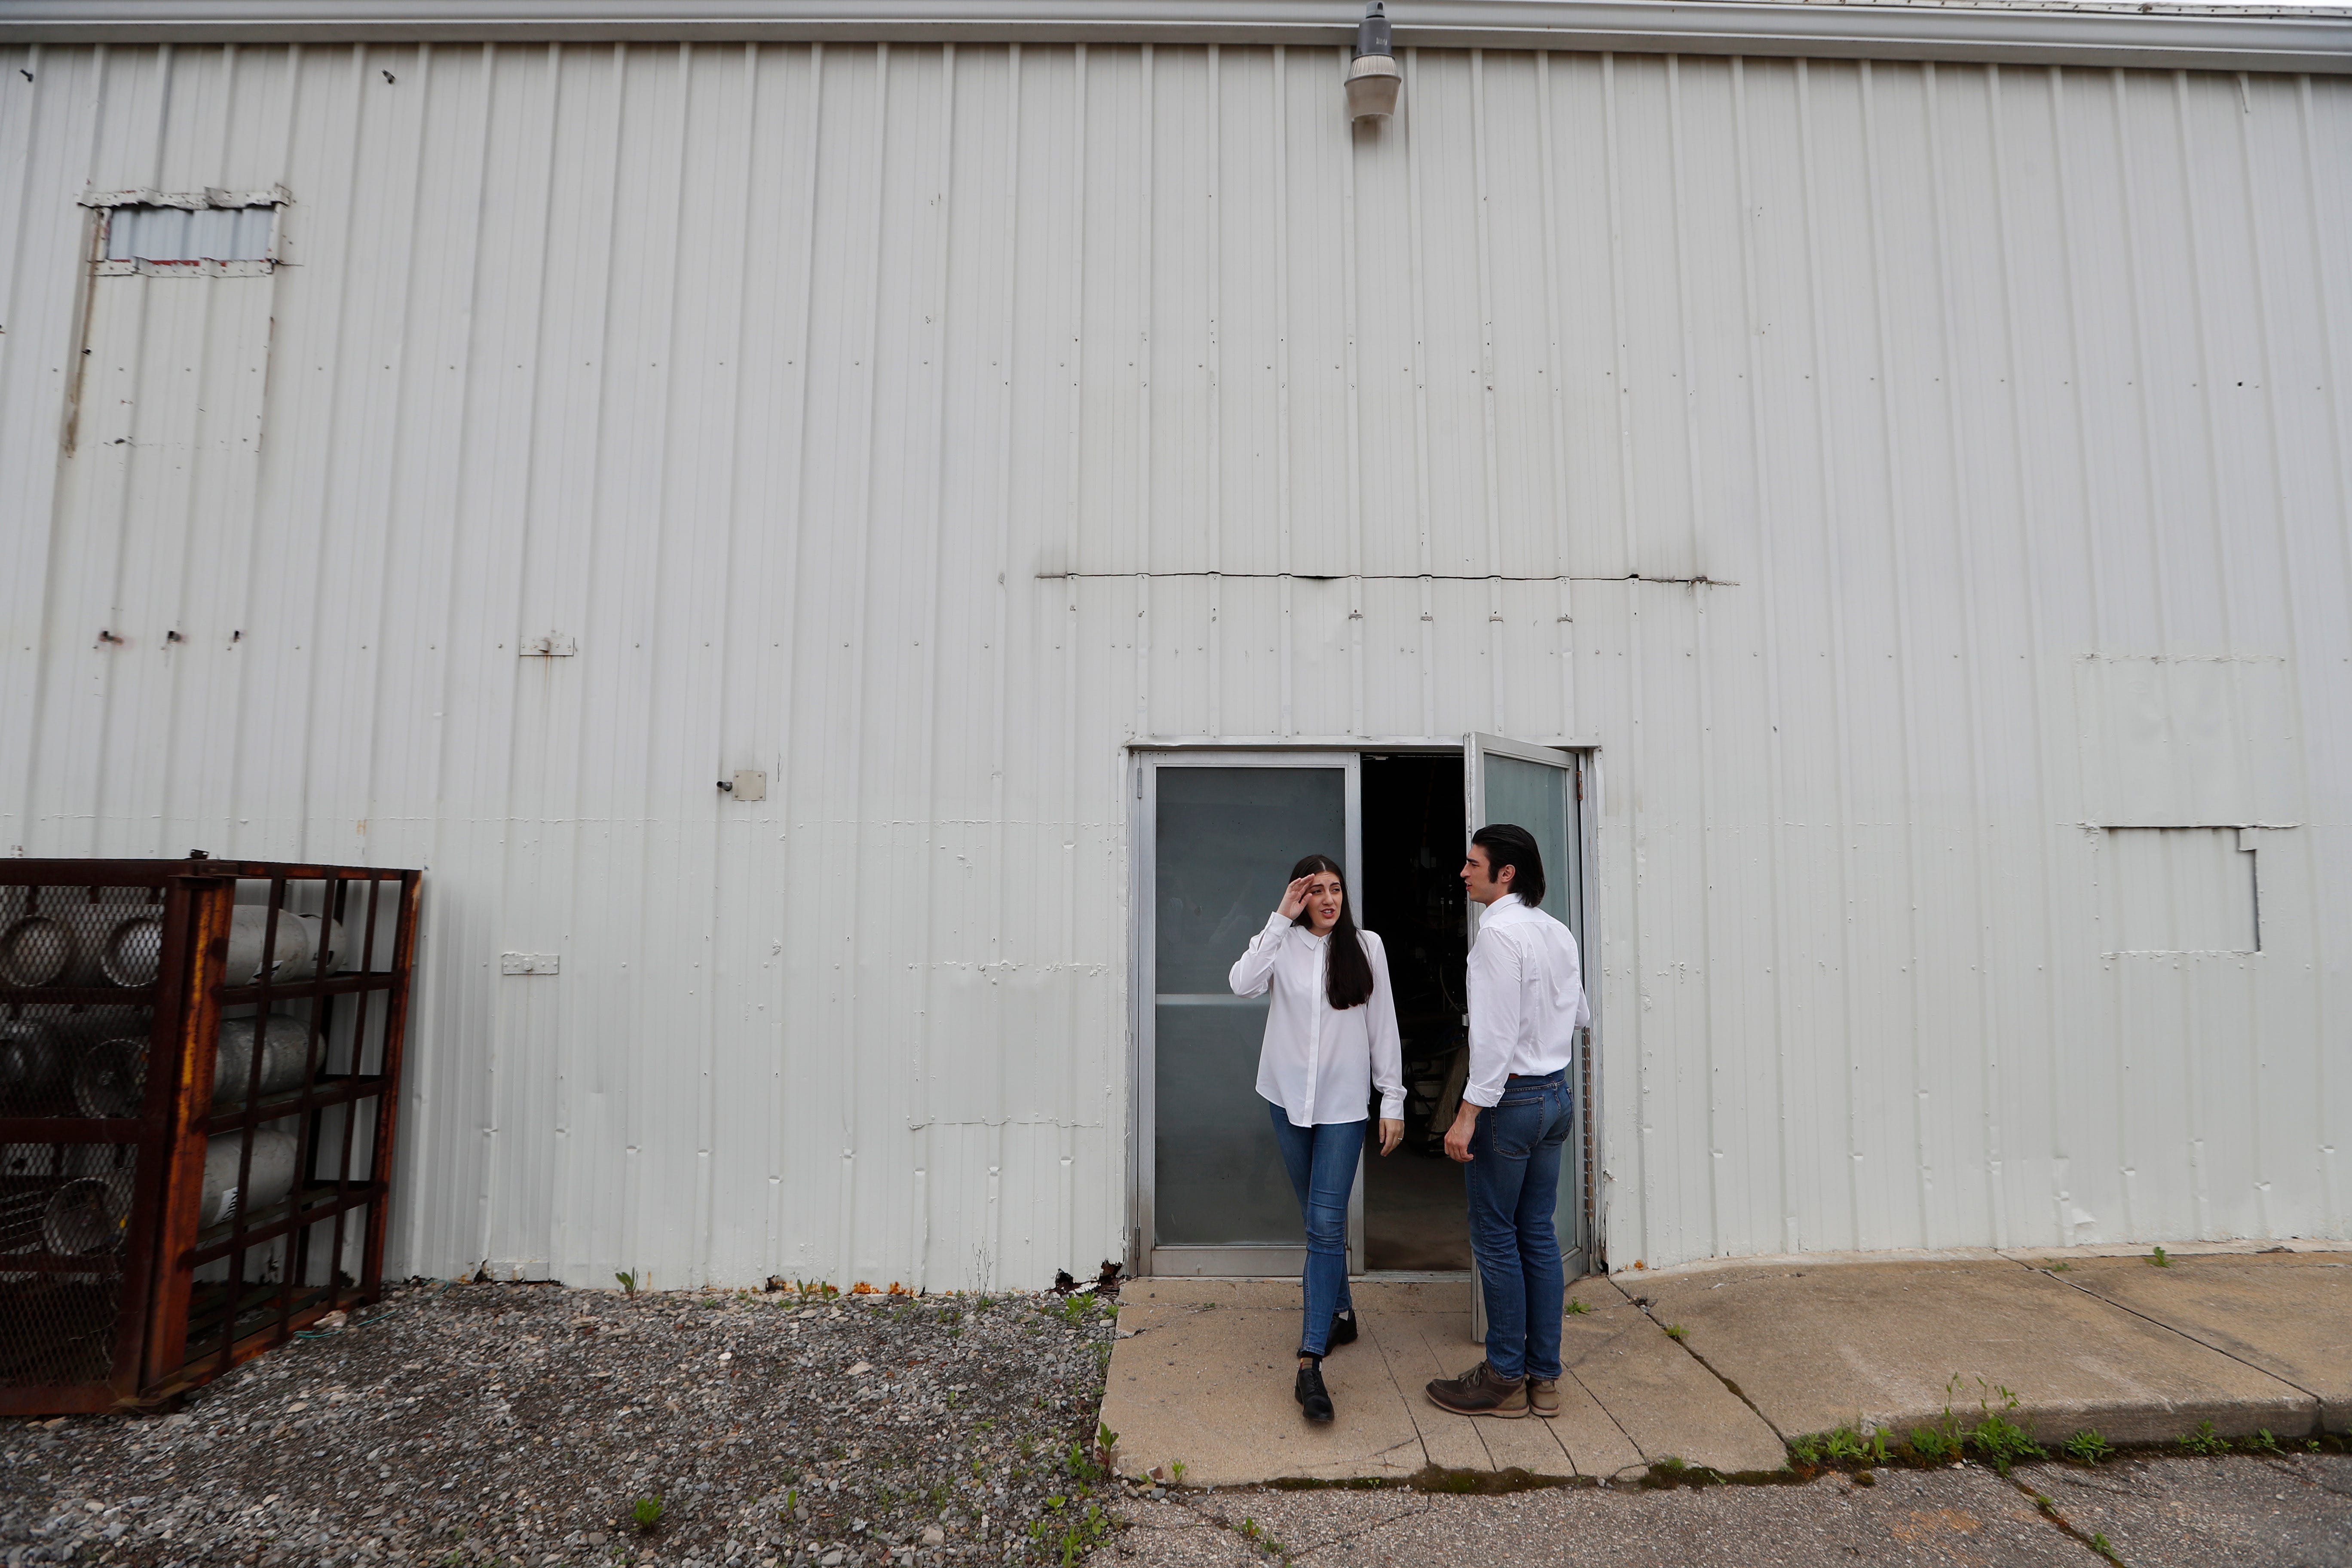 Mary Rose Maher and her fiance, William Chundrlik, visit a former Opus Bono Sacerdotii location in Dryden, Michigan, June 5.